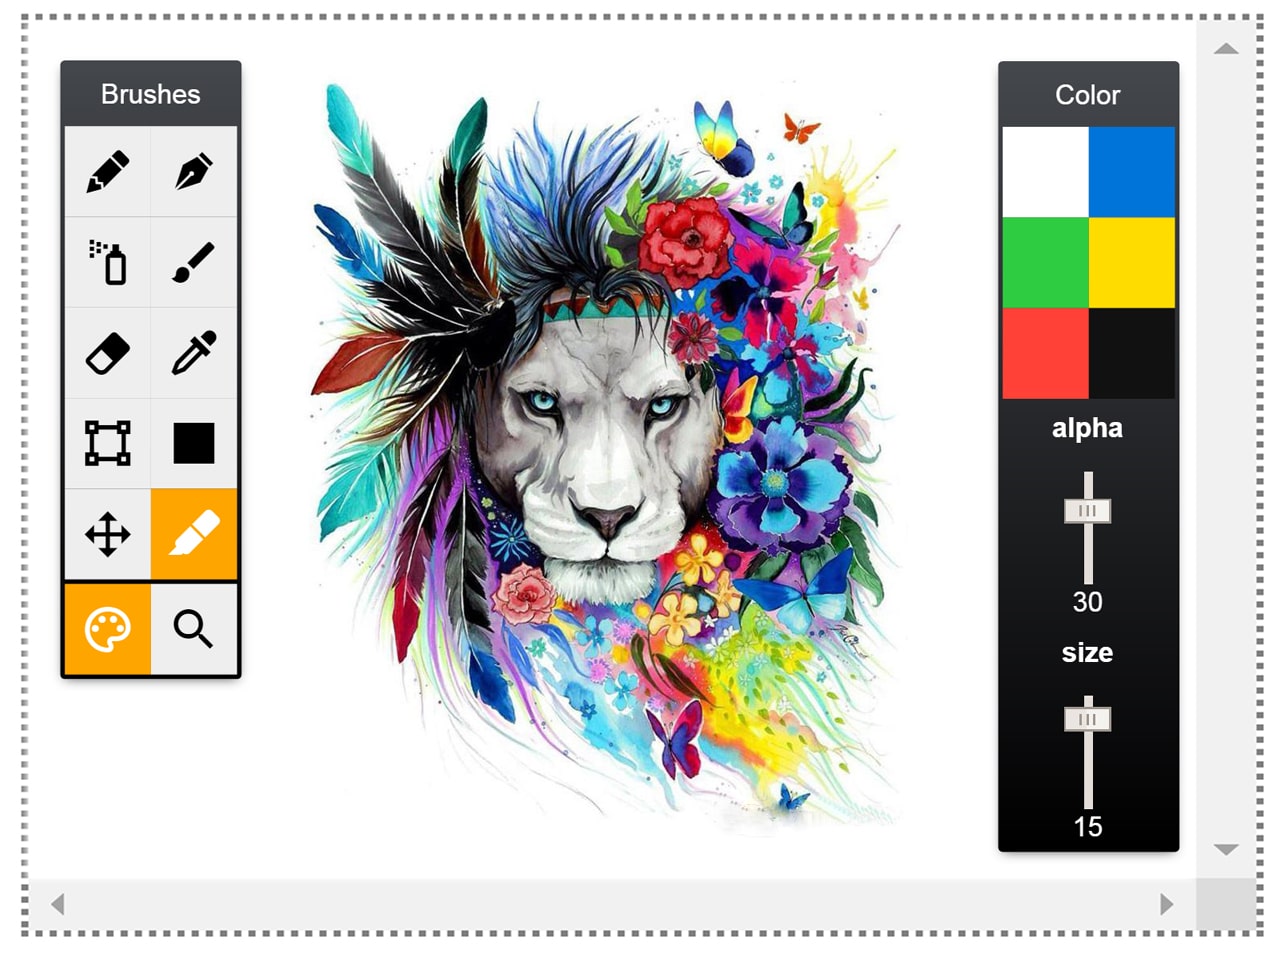 HTML5 Canvas Draw Shapes with Mouse - JQuery dRawr